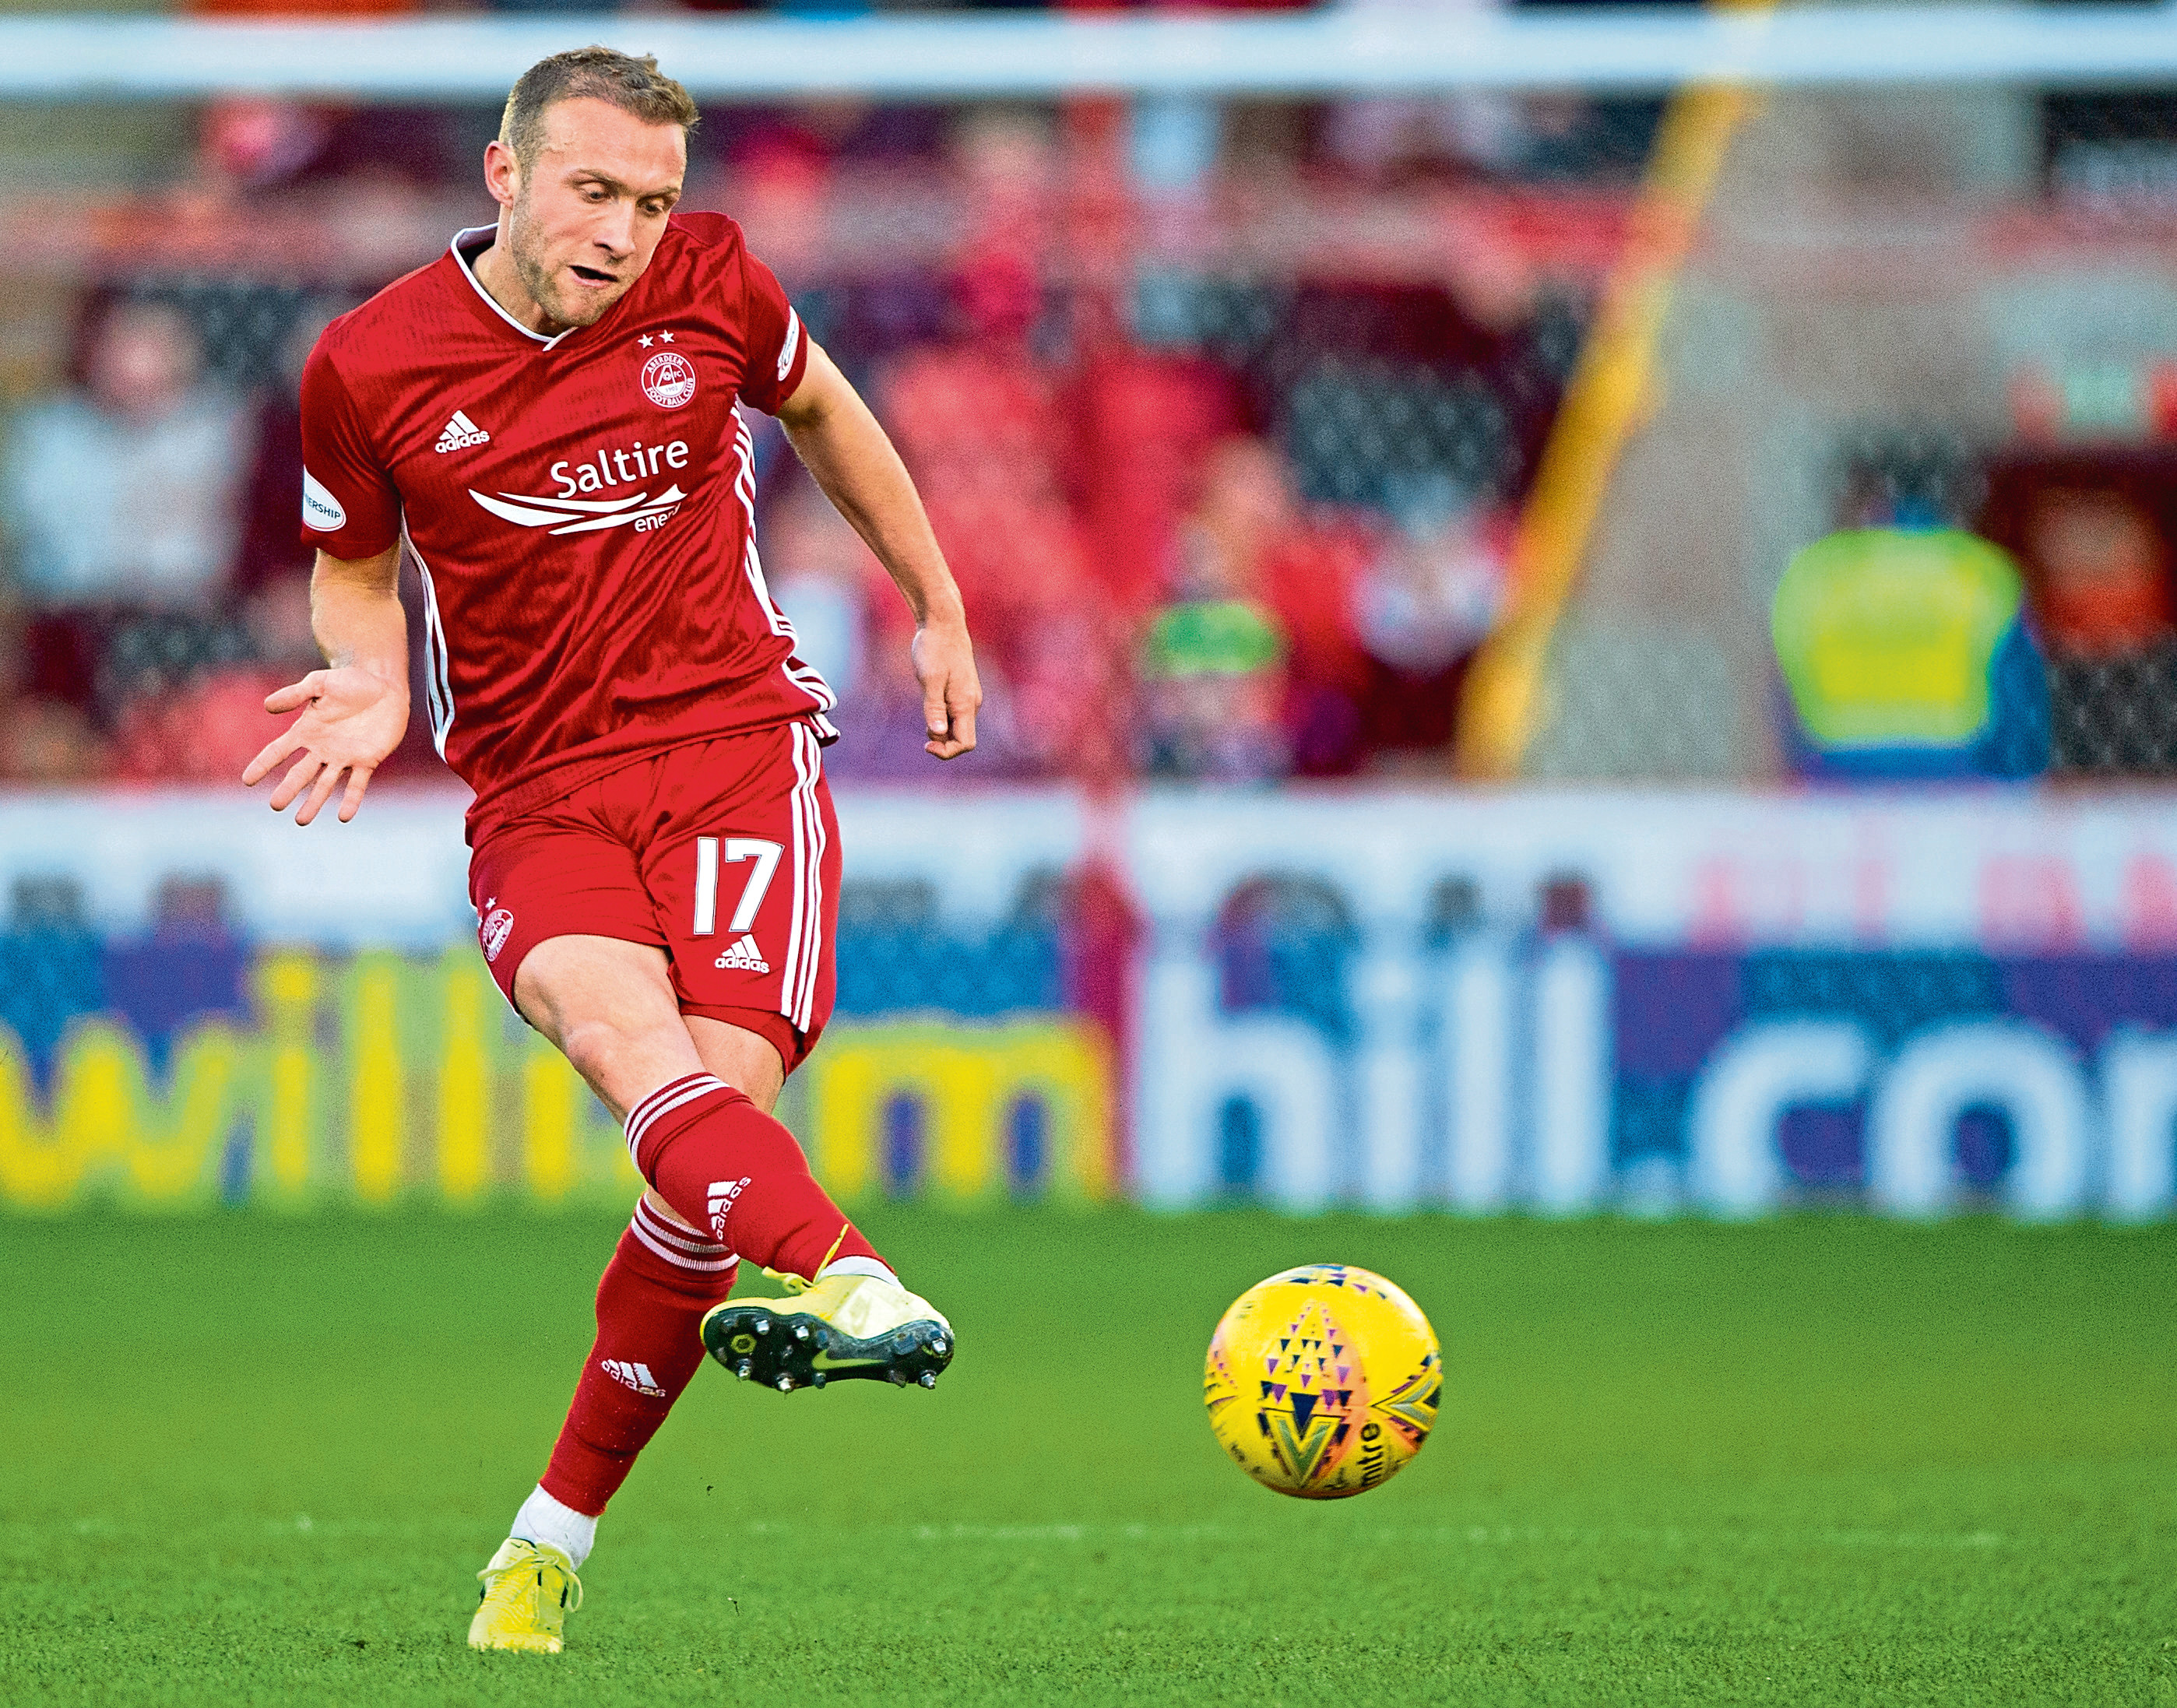 Dylan McGeouch in action during the William Hill Scottish Cup fourth round tie between Aberdeen and Dumbarton.